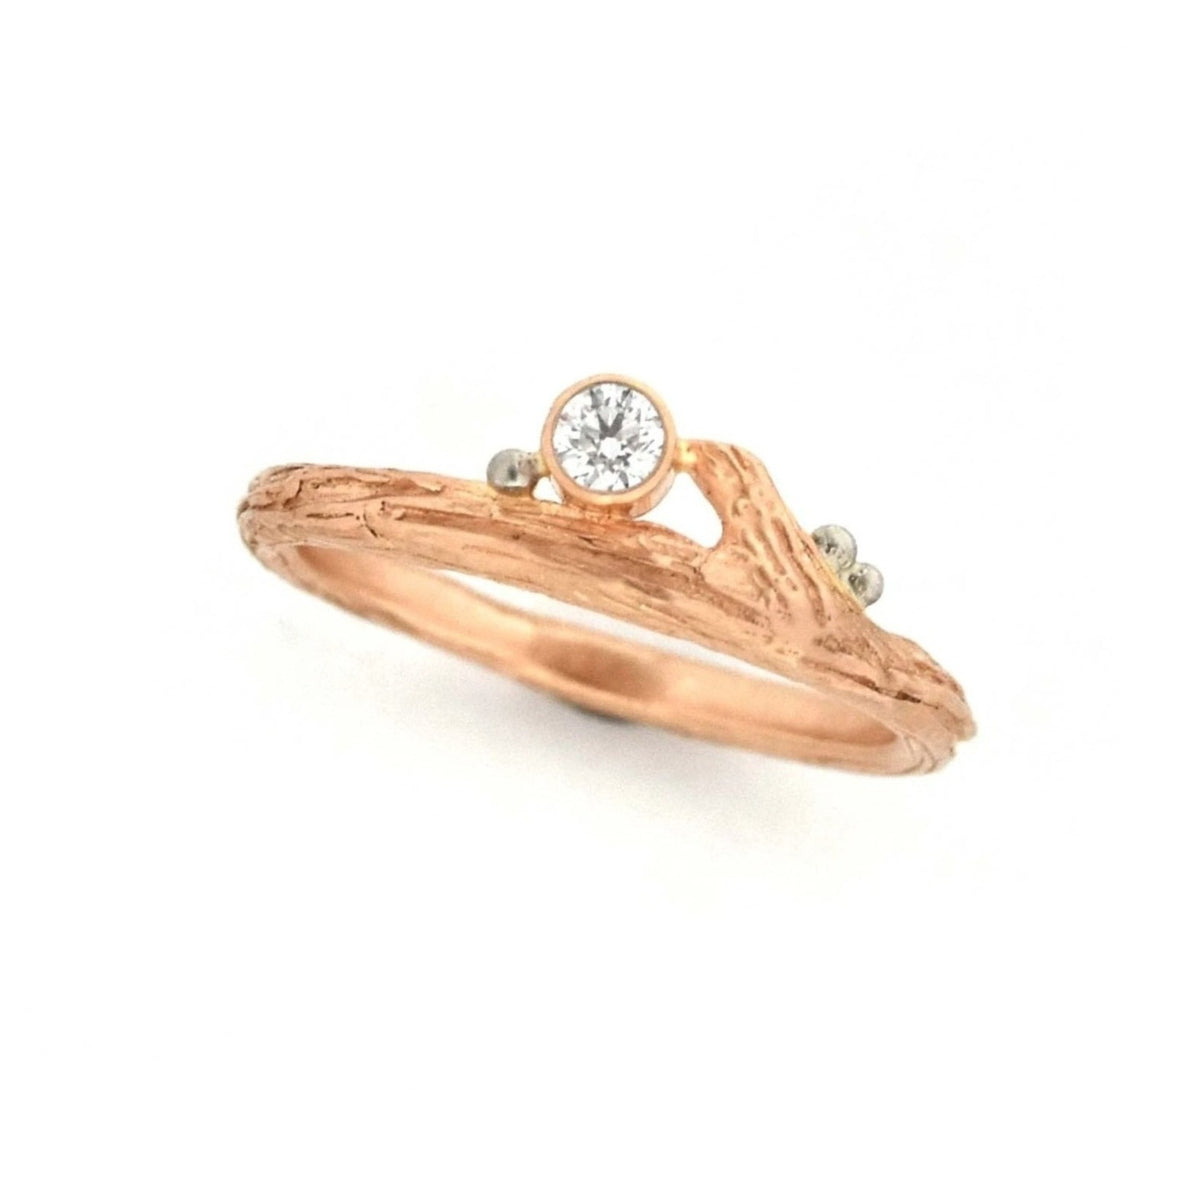 Rose Gold Diamond & Roses Twig Ring - your choice of stone - Wedding Ring Select Size / Recycled Diamond 4 / Recycled Diamond 3714 - handmade by Beth Millner Jewelry